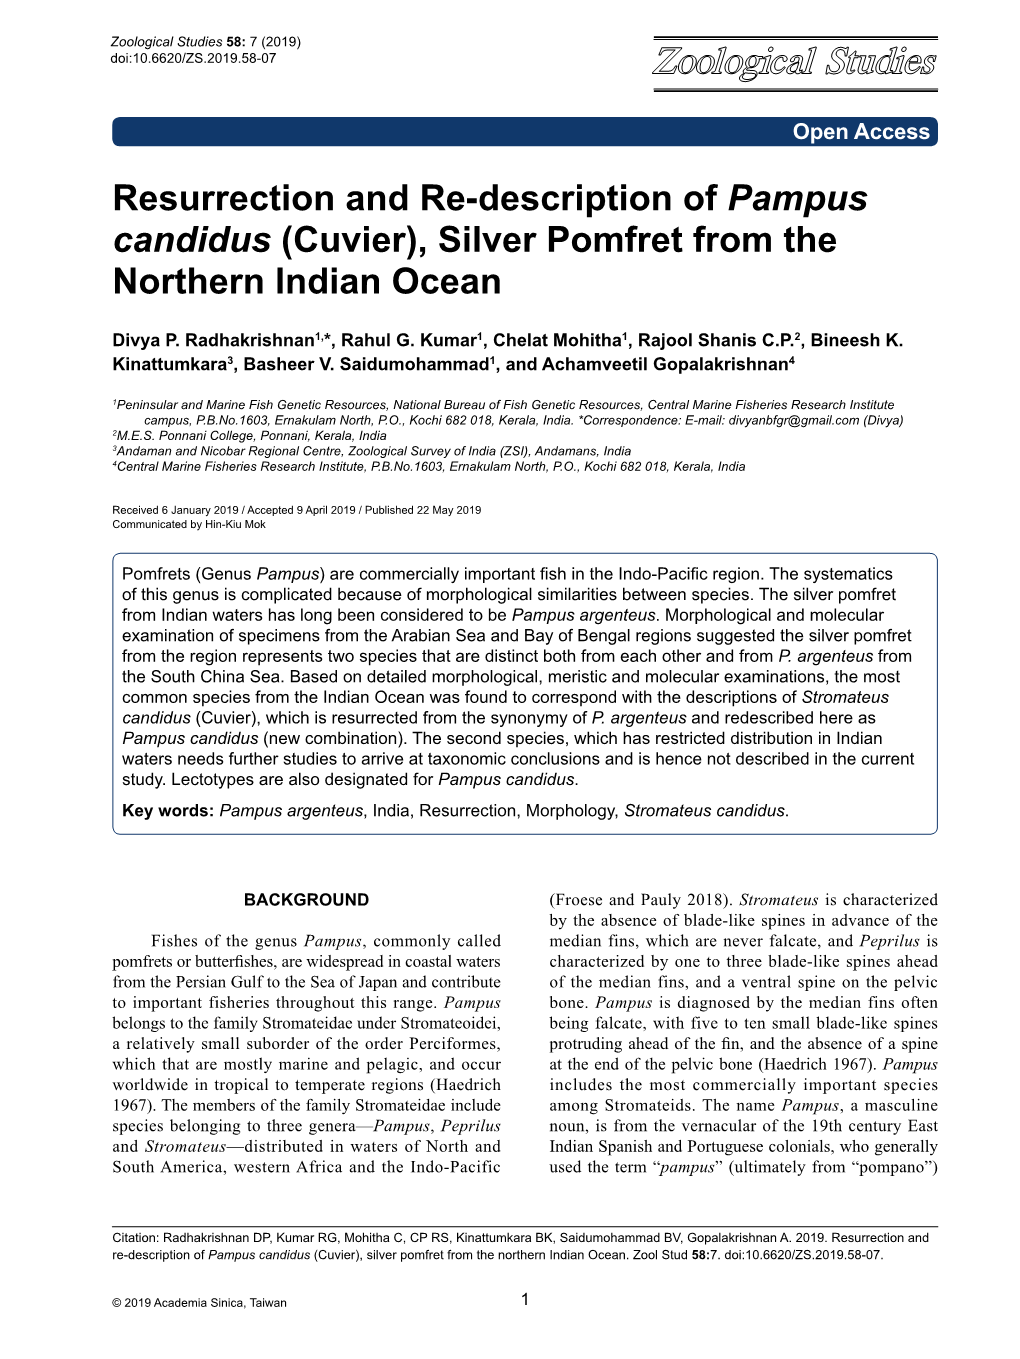 Resurrection and Re-Description of Pampus Candidus (Cuvier), Silver Pomfret from the Northern Indian Ocean